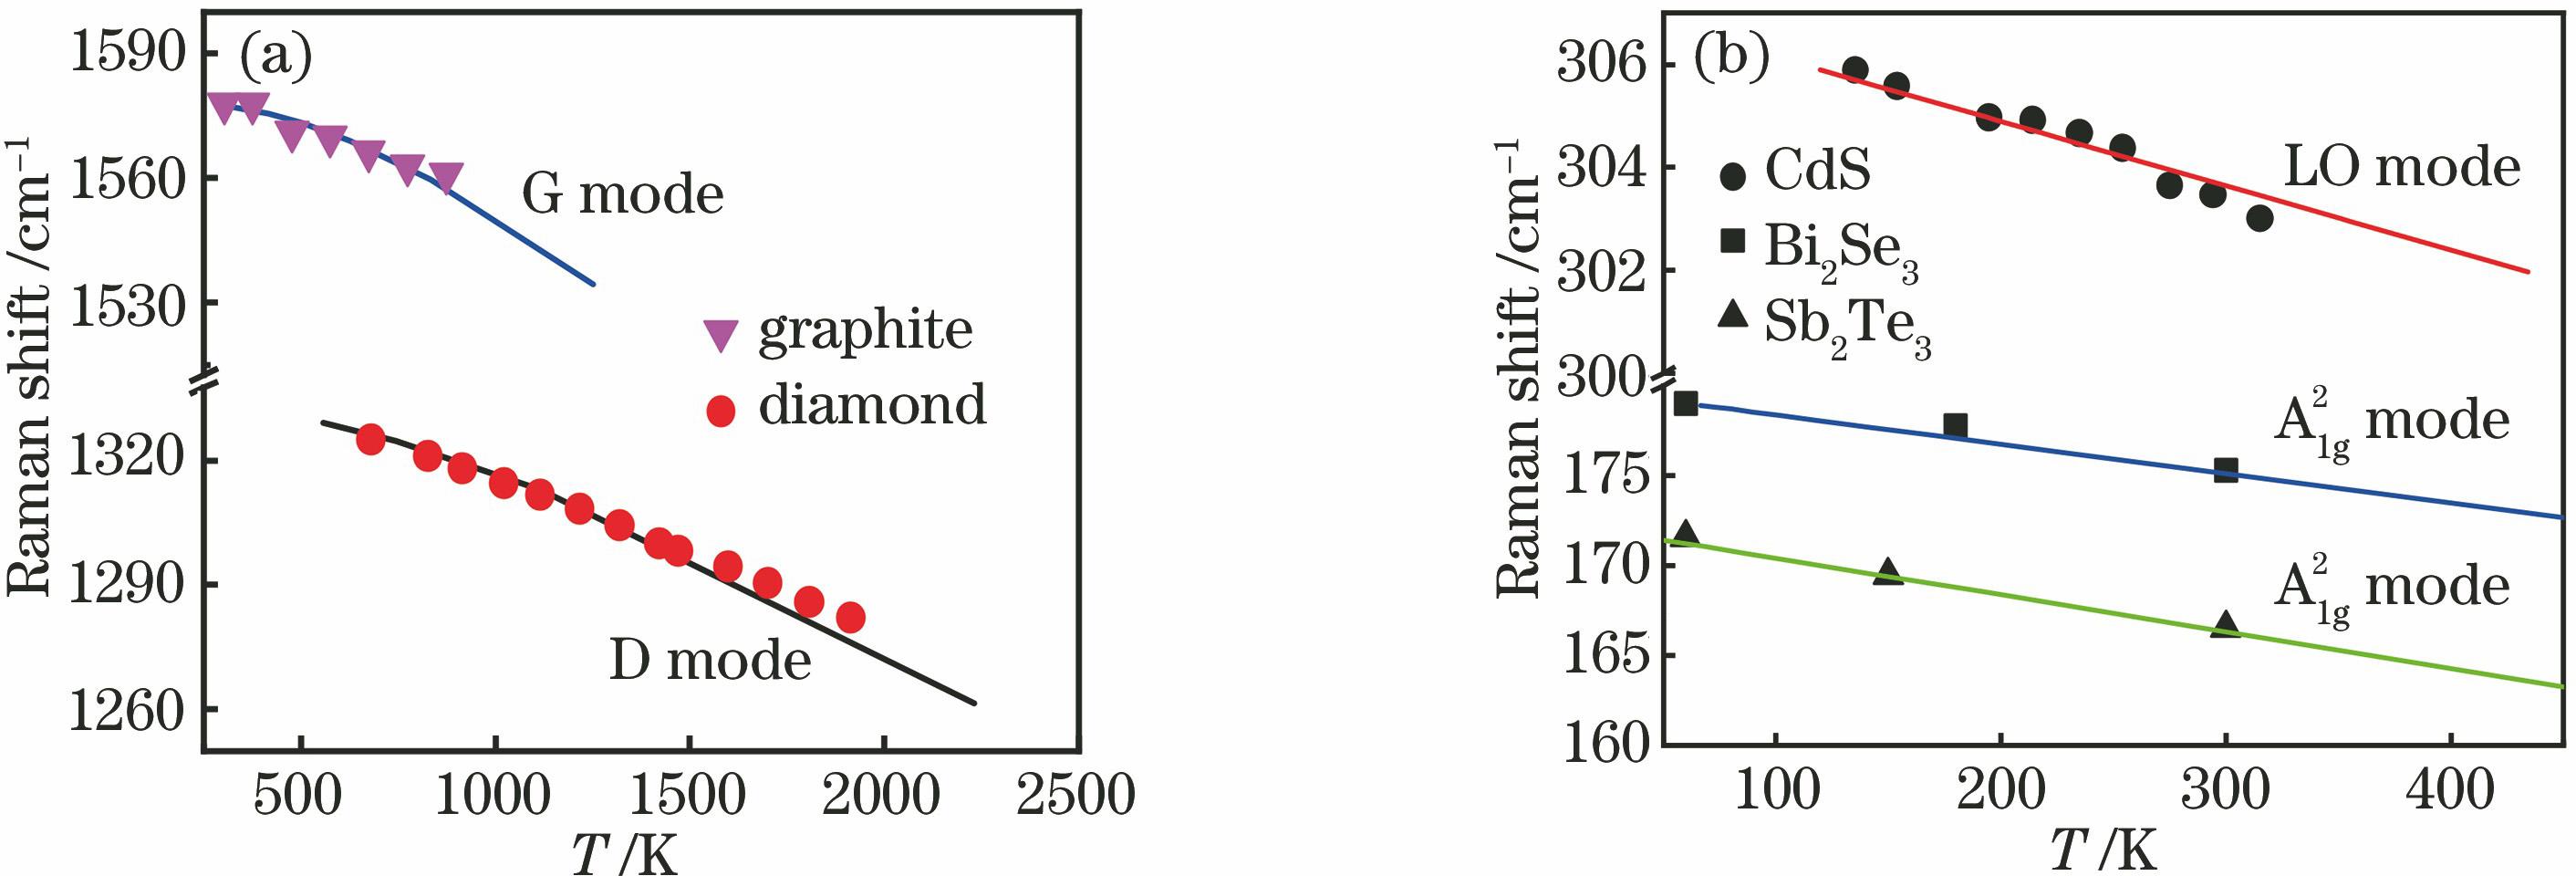 Raman frequency shift effect at high temperature (scattered points are experimental measured values and solid lines are theoretical values). (a) Diamond and graphite[24,28]; (b) CdS, Bi2Se3 and Sb2Te3[25,26]